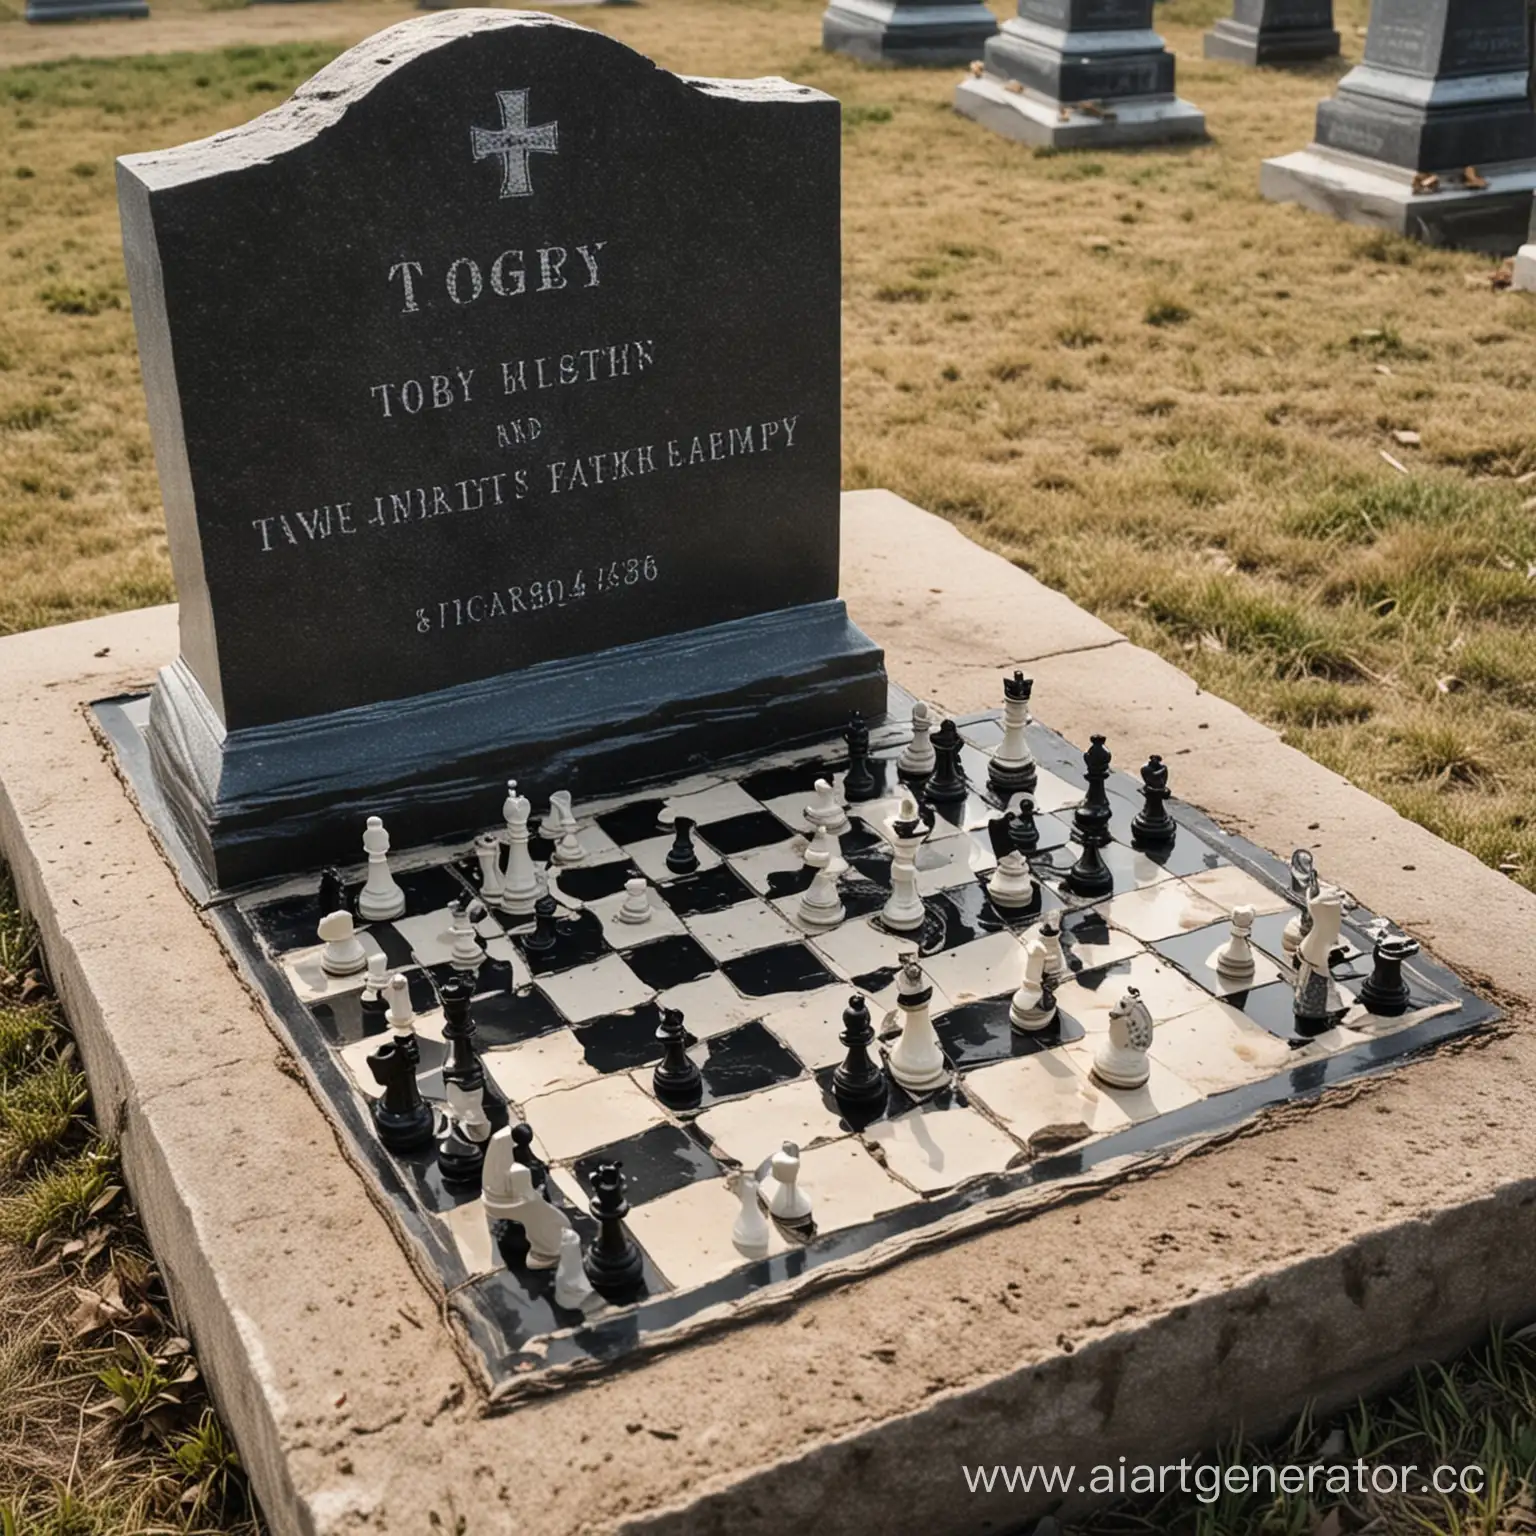 Grave with the name Toby and epitaphy: Was checkmated in chess boxing"